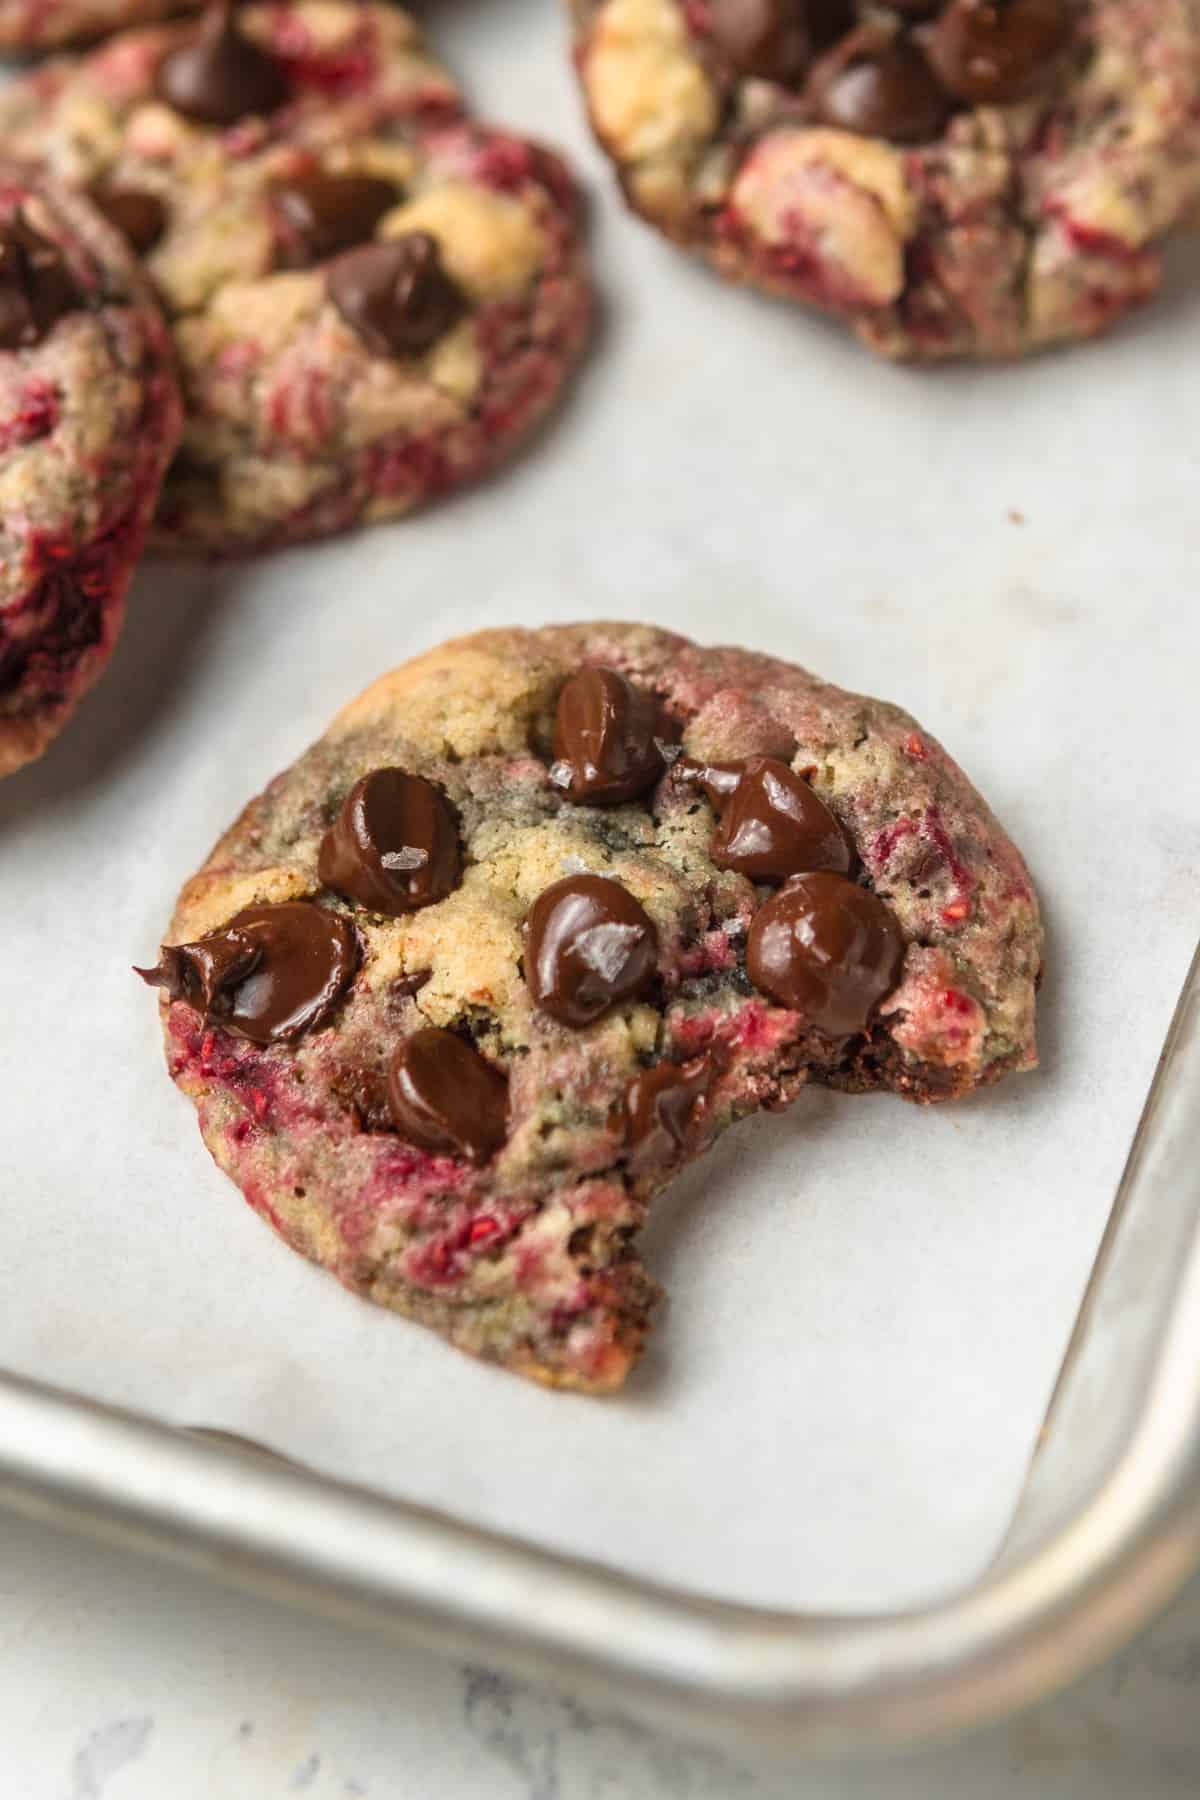 A raspberry chocolate chip cookie with a bite taken out of it.